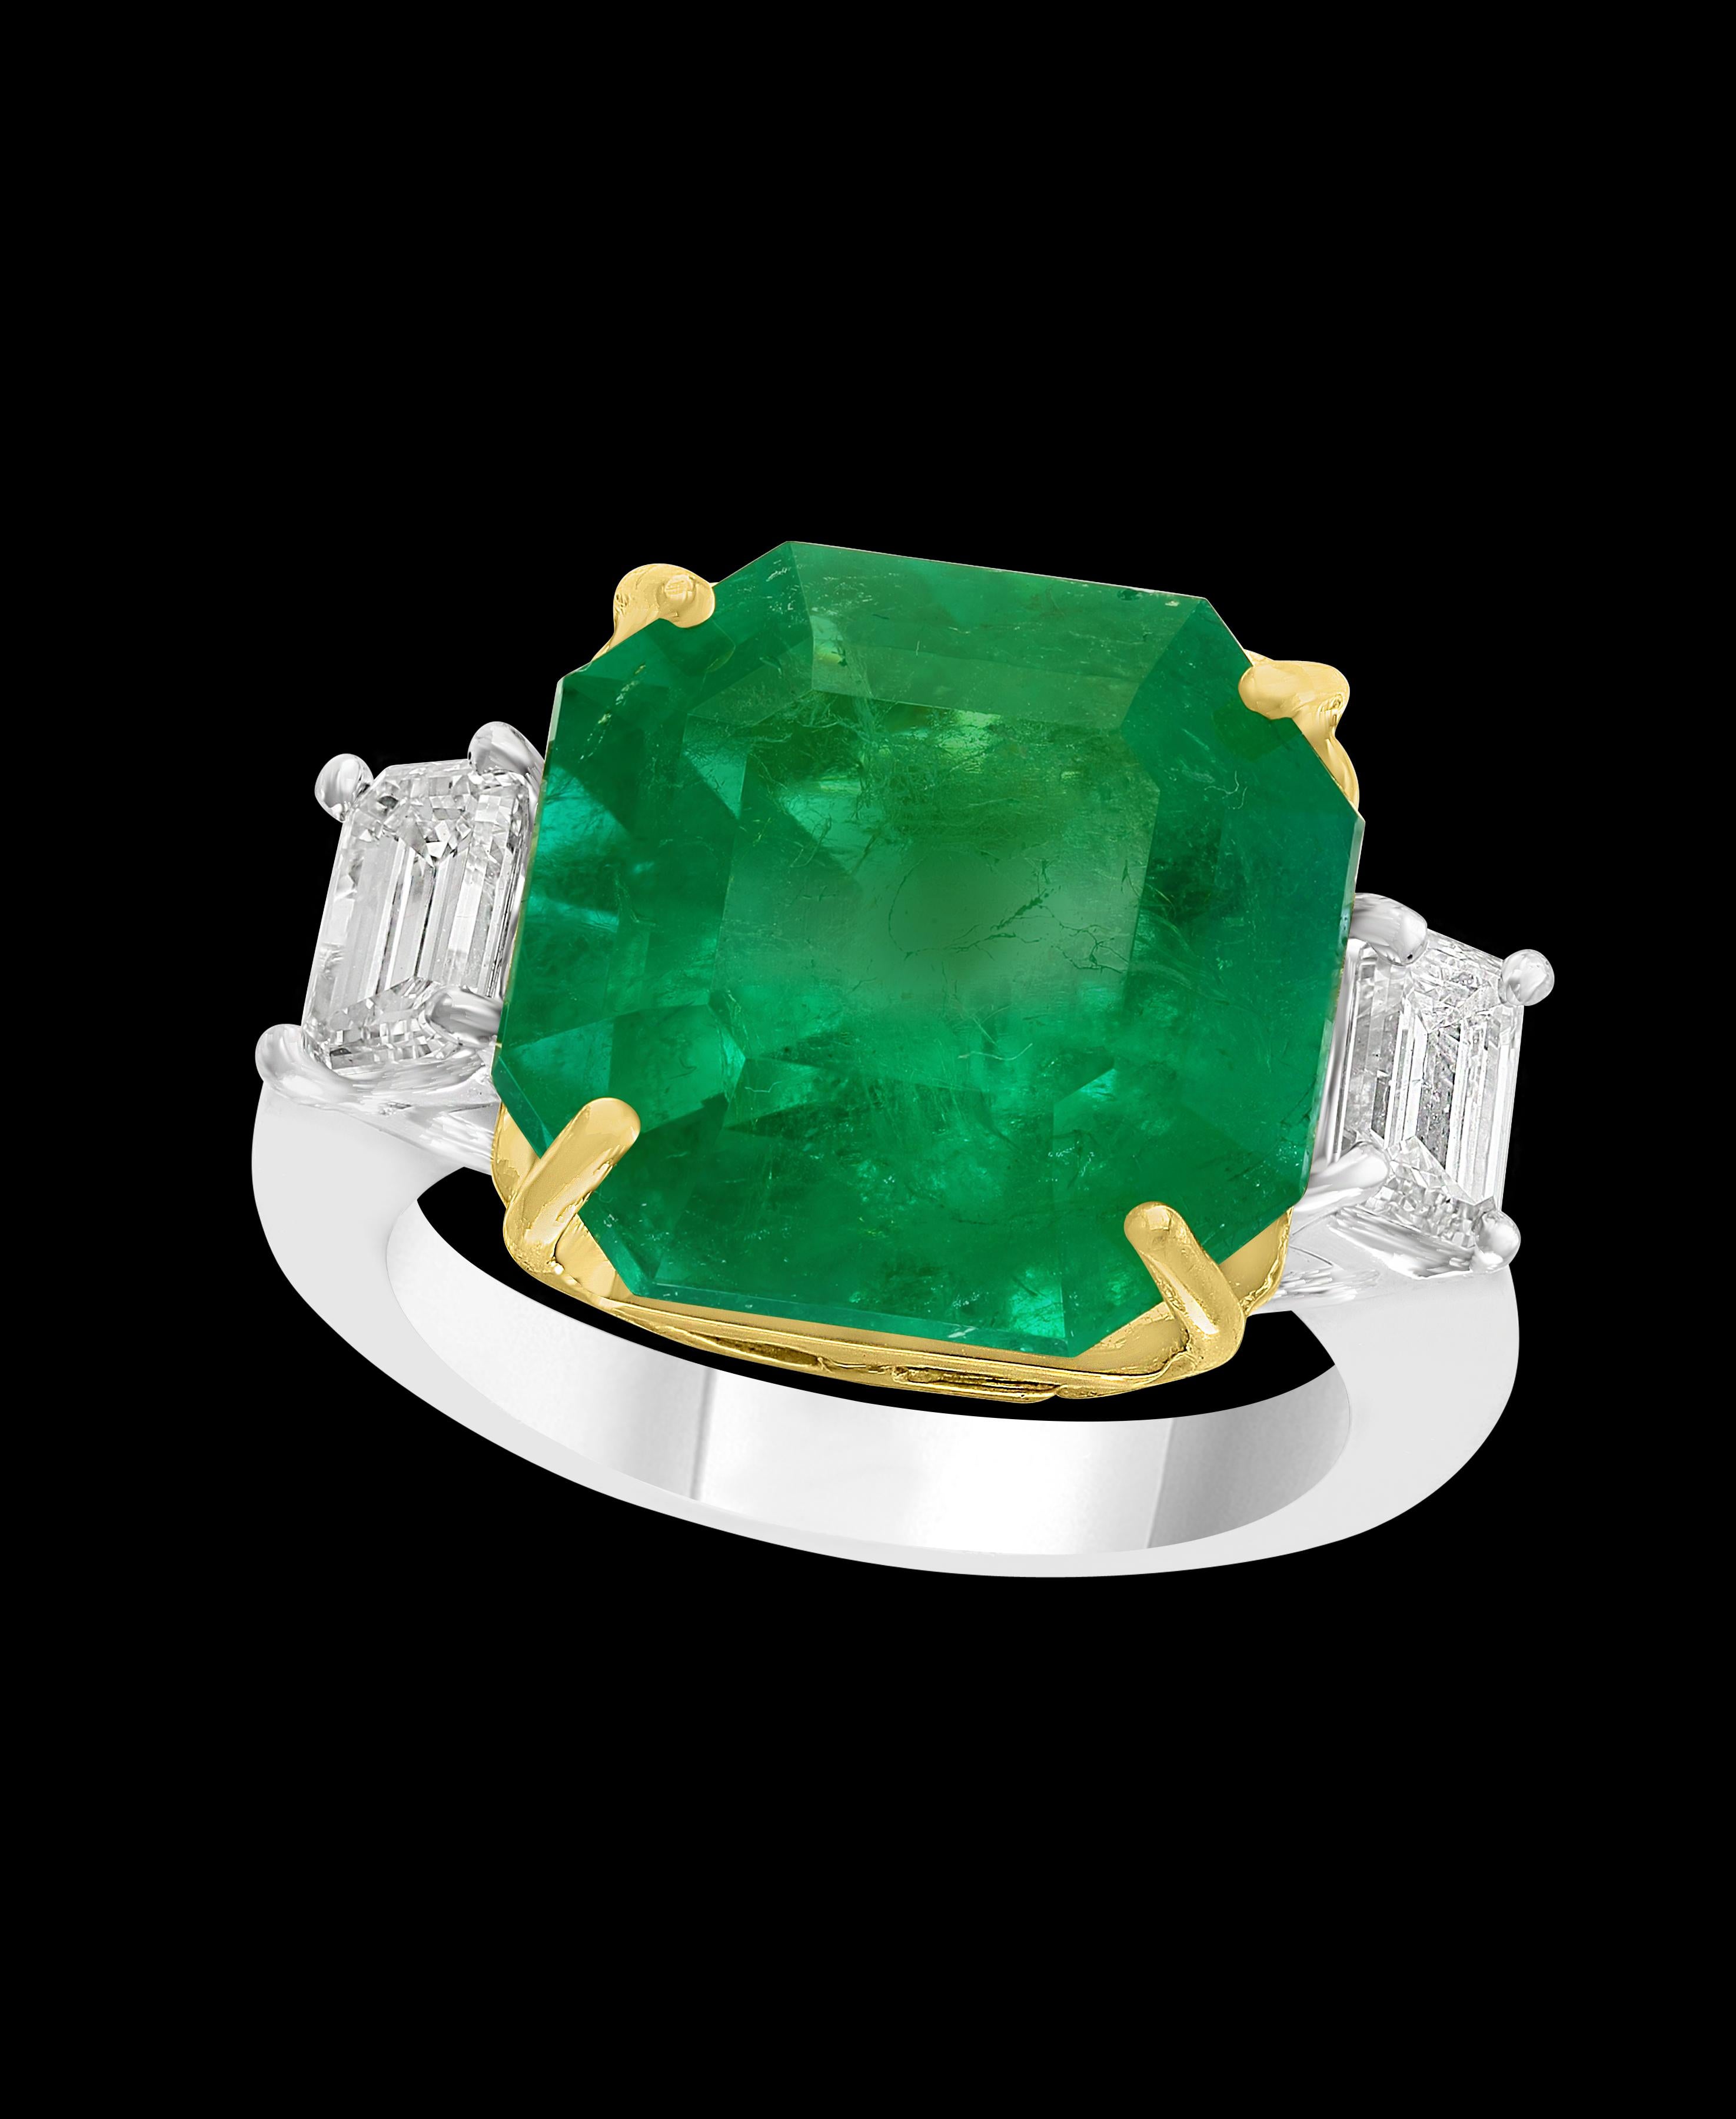  AGL Certified 10.25 Carat Emerald Cut Colombian Emerald Diamond 18 Karat White gold Ring
AGL Report # 1102590
Measurements 13.67x13.62x9.28
  Estate  piece  Natural Emerald with no color enhancement.
Two Emerald cut  Diamonds on either side of the